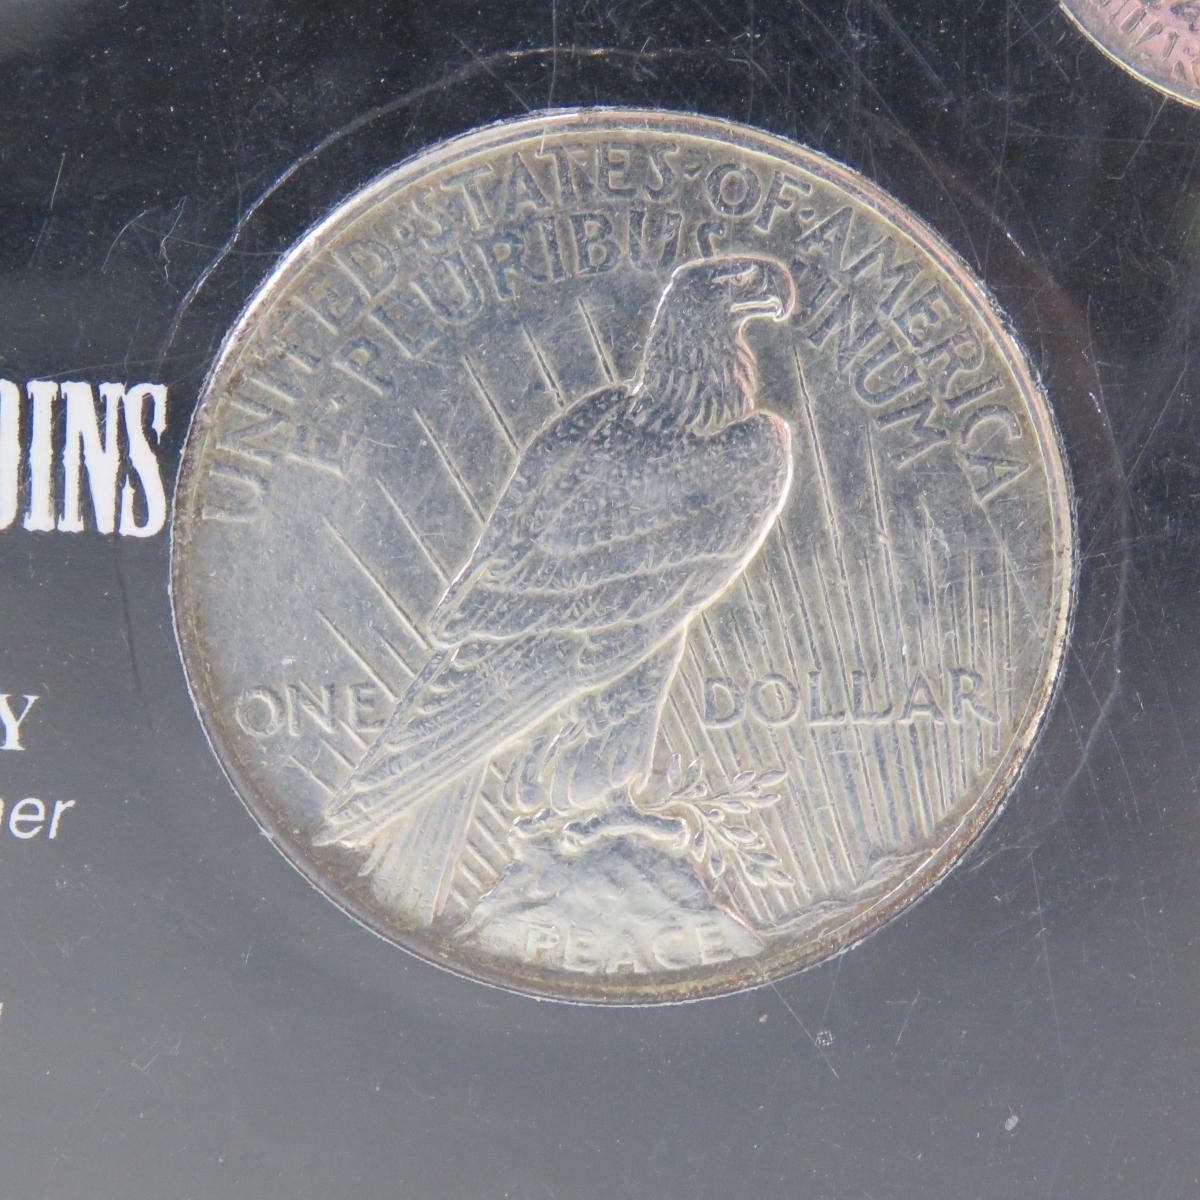 Vintage American Coin set with 1925 Peace Dollar